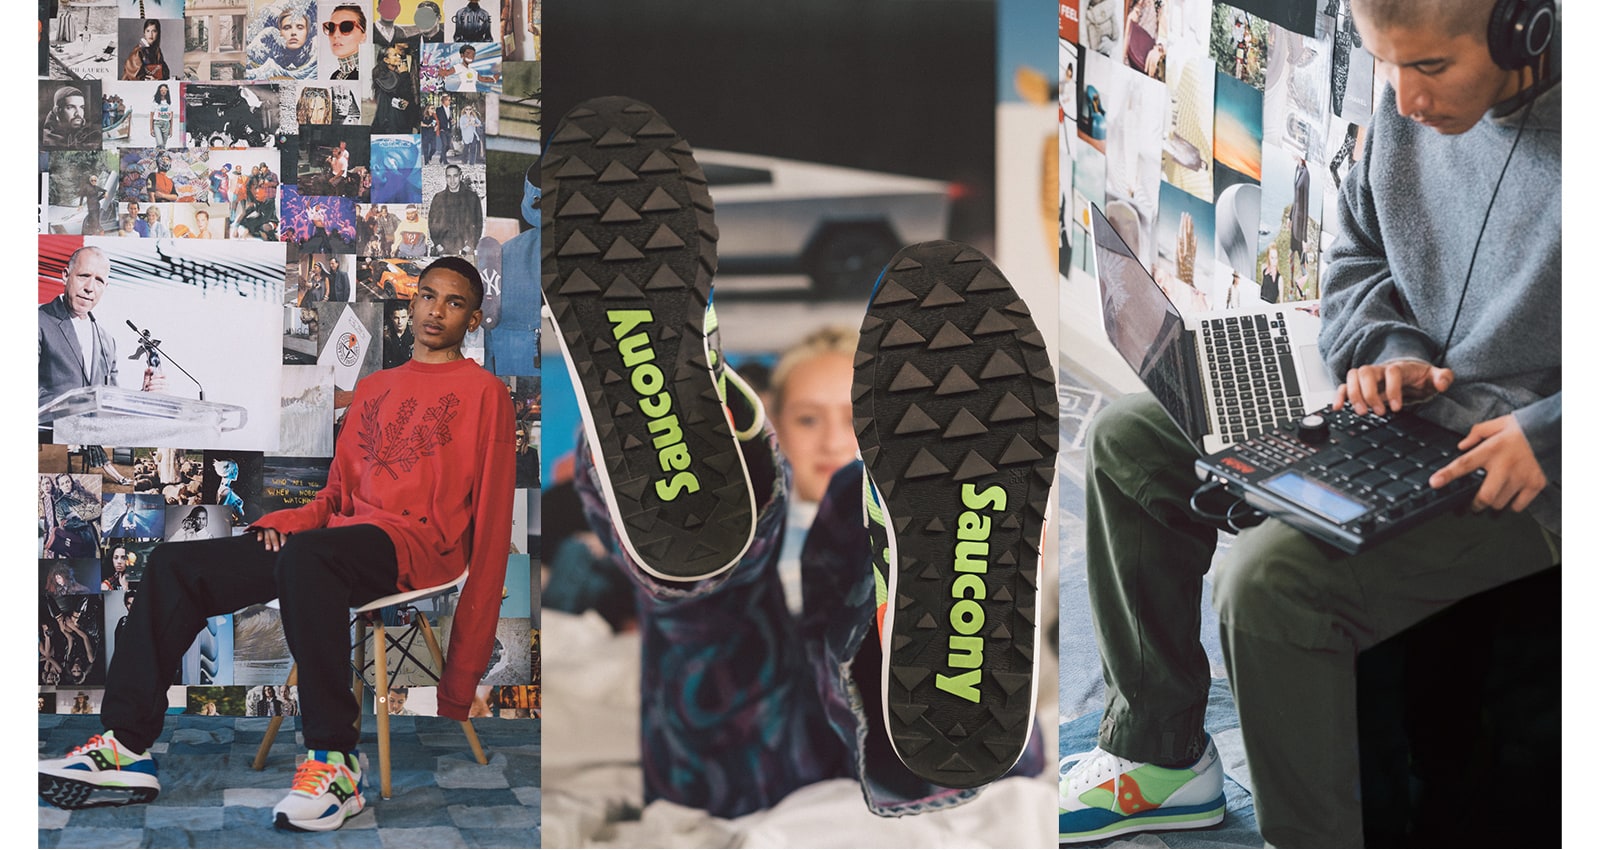 3 images of people wearing the Saucony Abstract Jazz shoes.